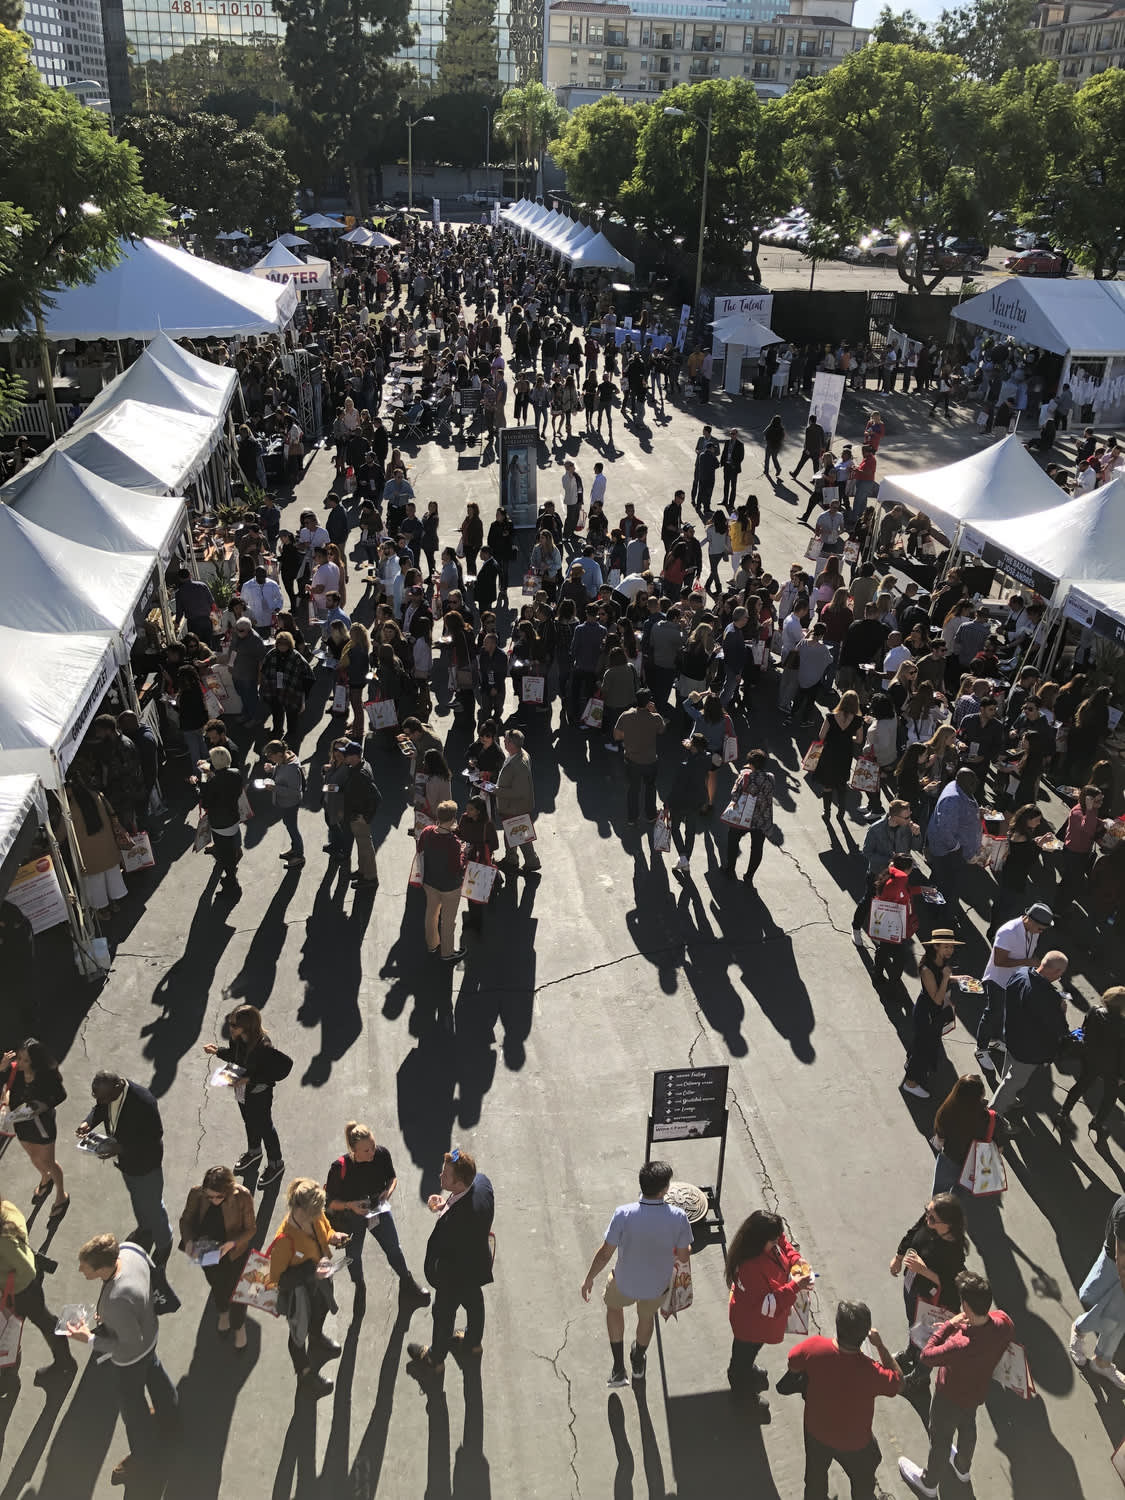 Overhead view of the street at a Food And Wine Festival